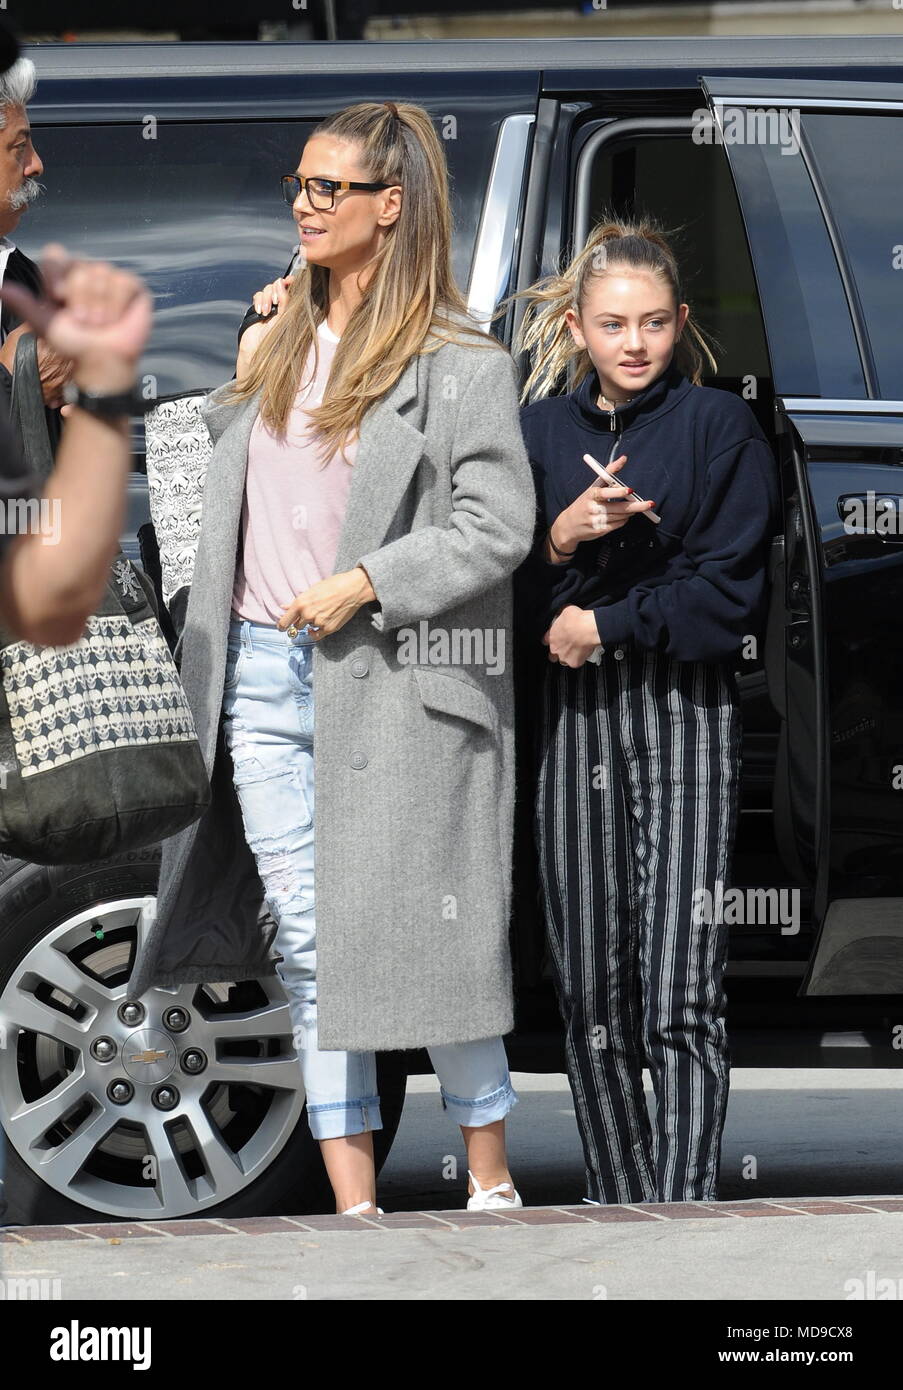 Heidi Klum arriving at the "Americas Got Talent" show in Pasadena with her  daughter Leni. Co Judge Simon Cowell also arriving at the show Featuring:  Heidi Klum, Leni Where: Pasadena, California, United